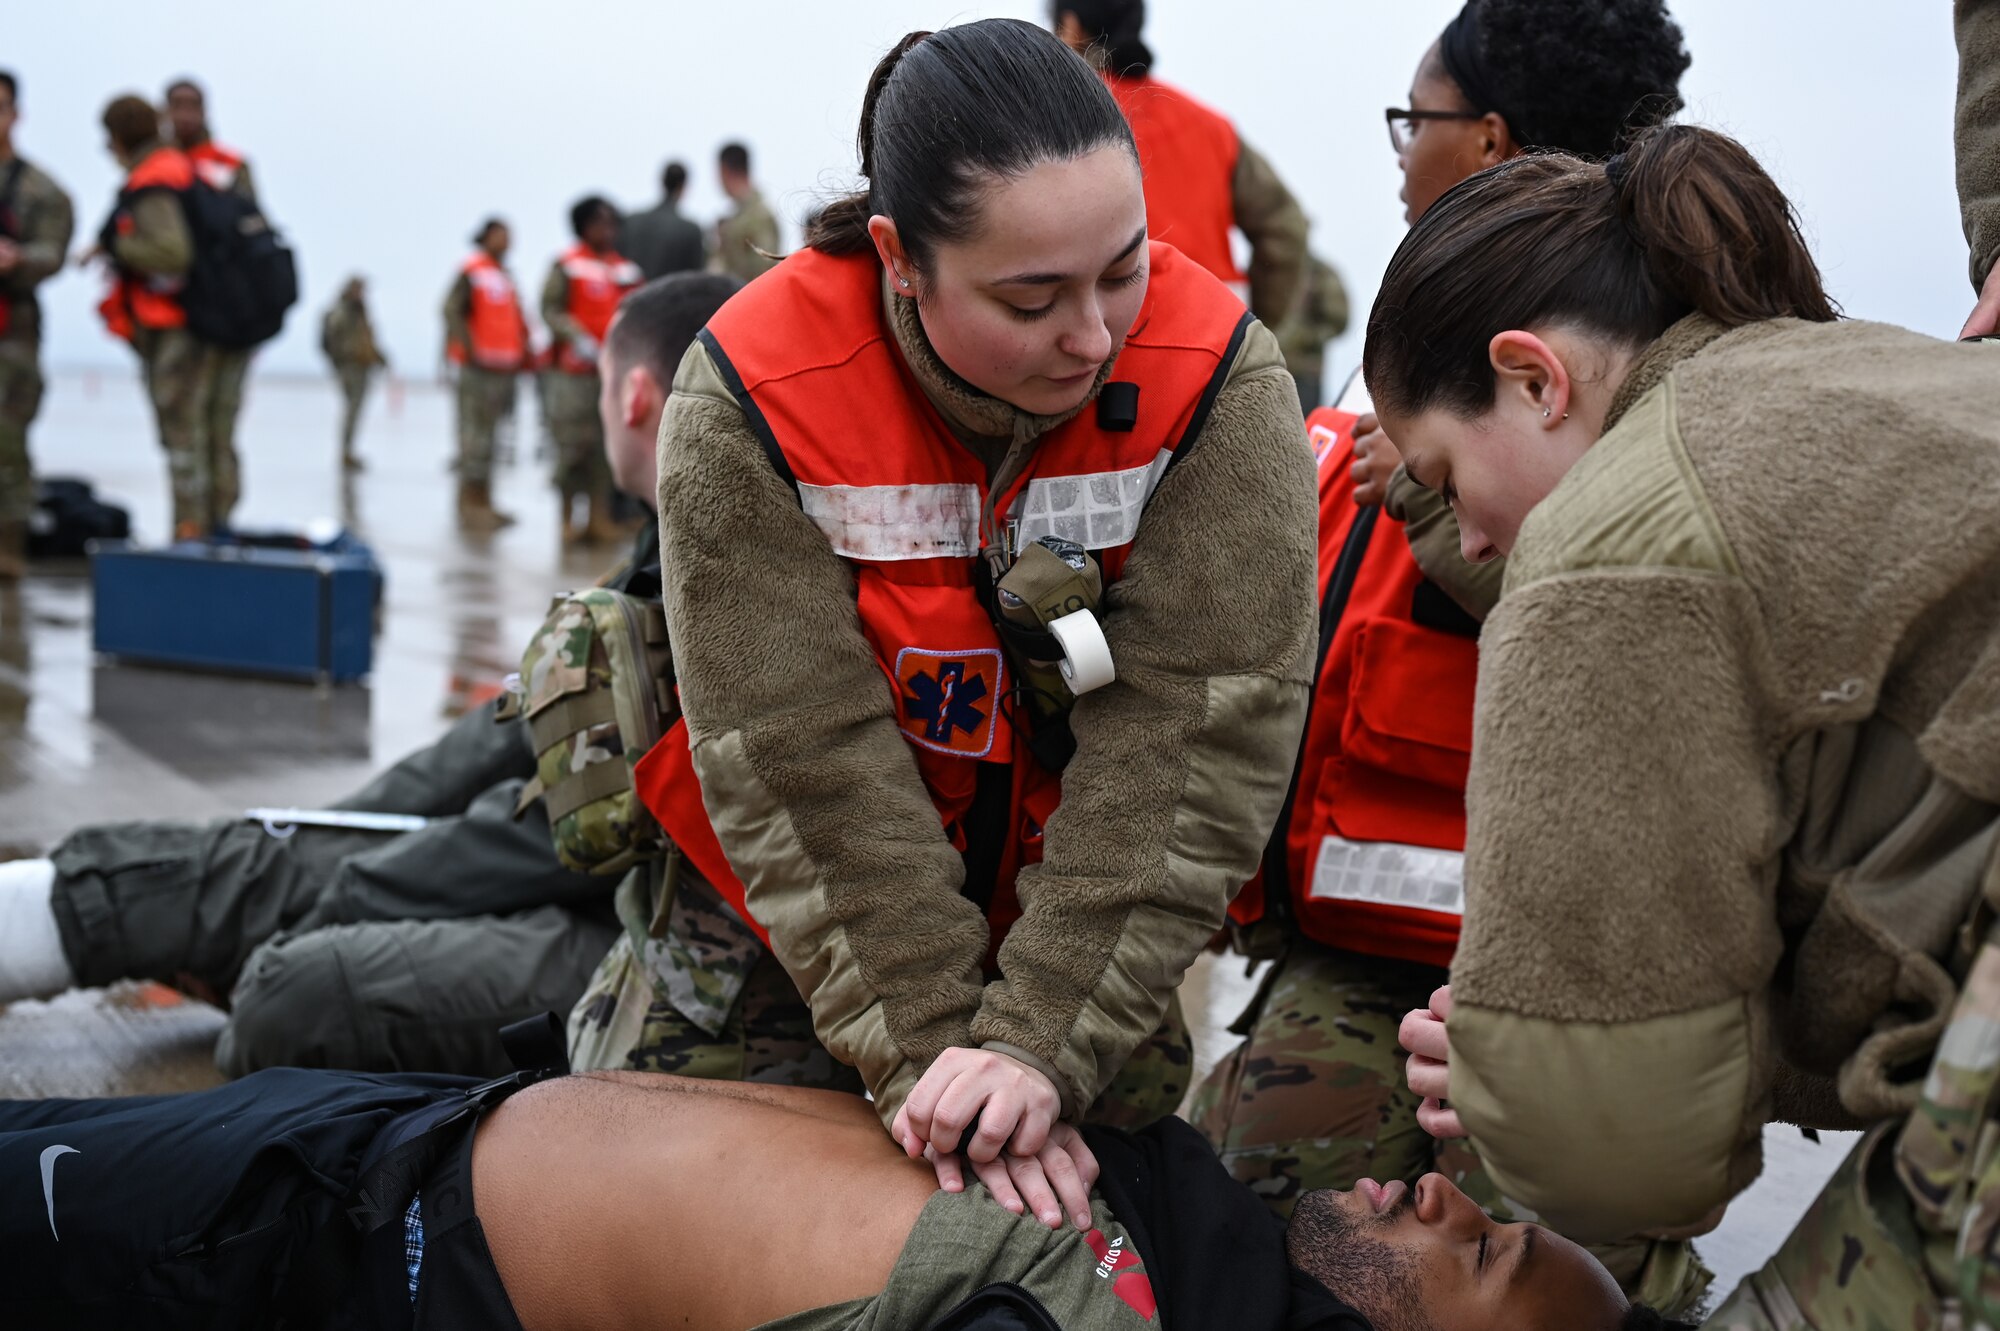 U.S. Air Force Senior Airman Madison Vega (left), 47th Medical Group family medicine technician and Airman 1st Class Morgann Trombley, 47th MDG dental technician, treat a simulated unresponsive patient during a Major Accident Response Exercise (MARE) on the flight line at Laughlin Air Force Base, Texas, Dec. 14, 2023.